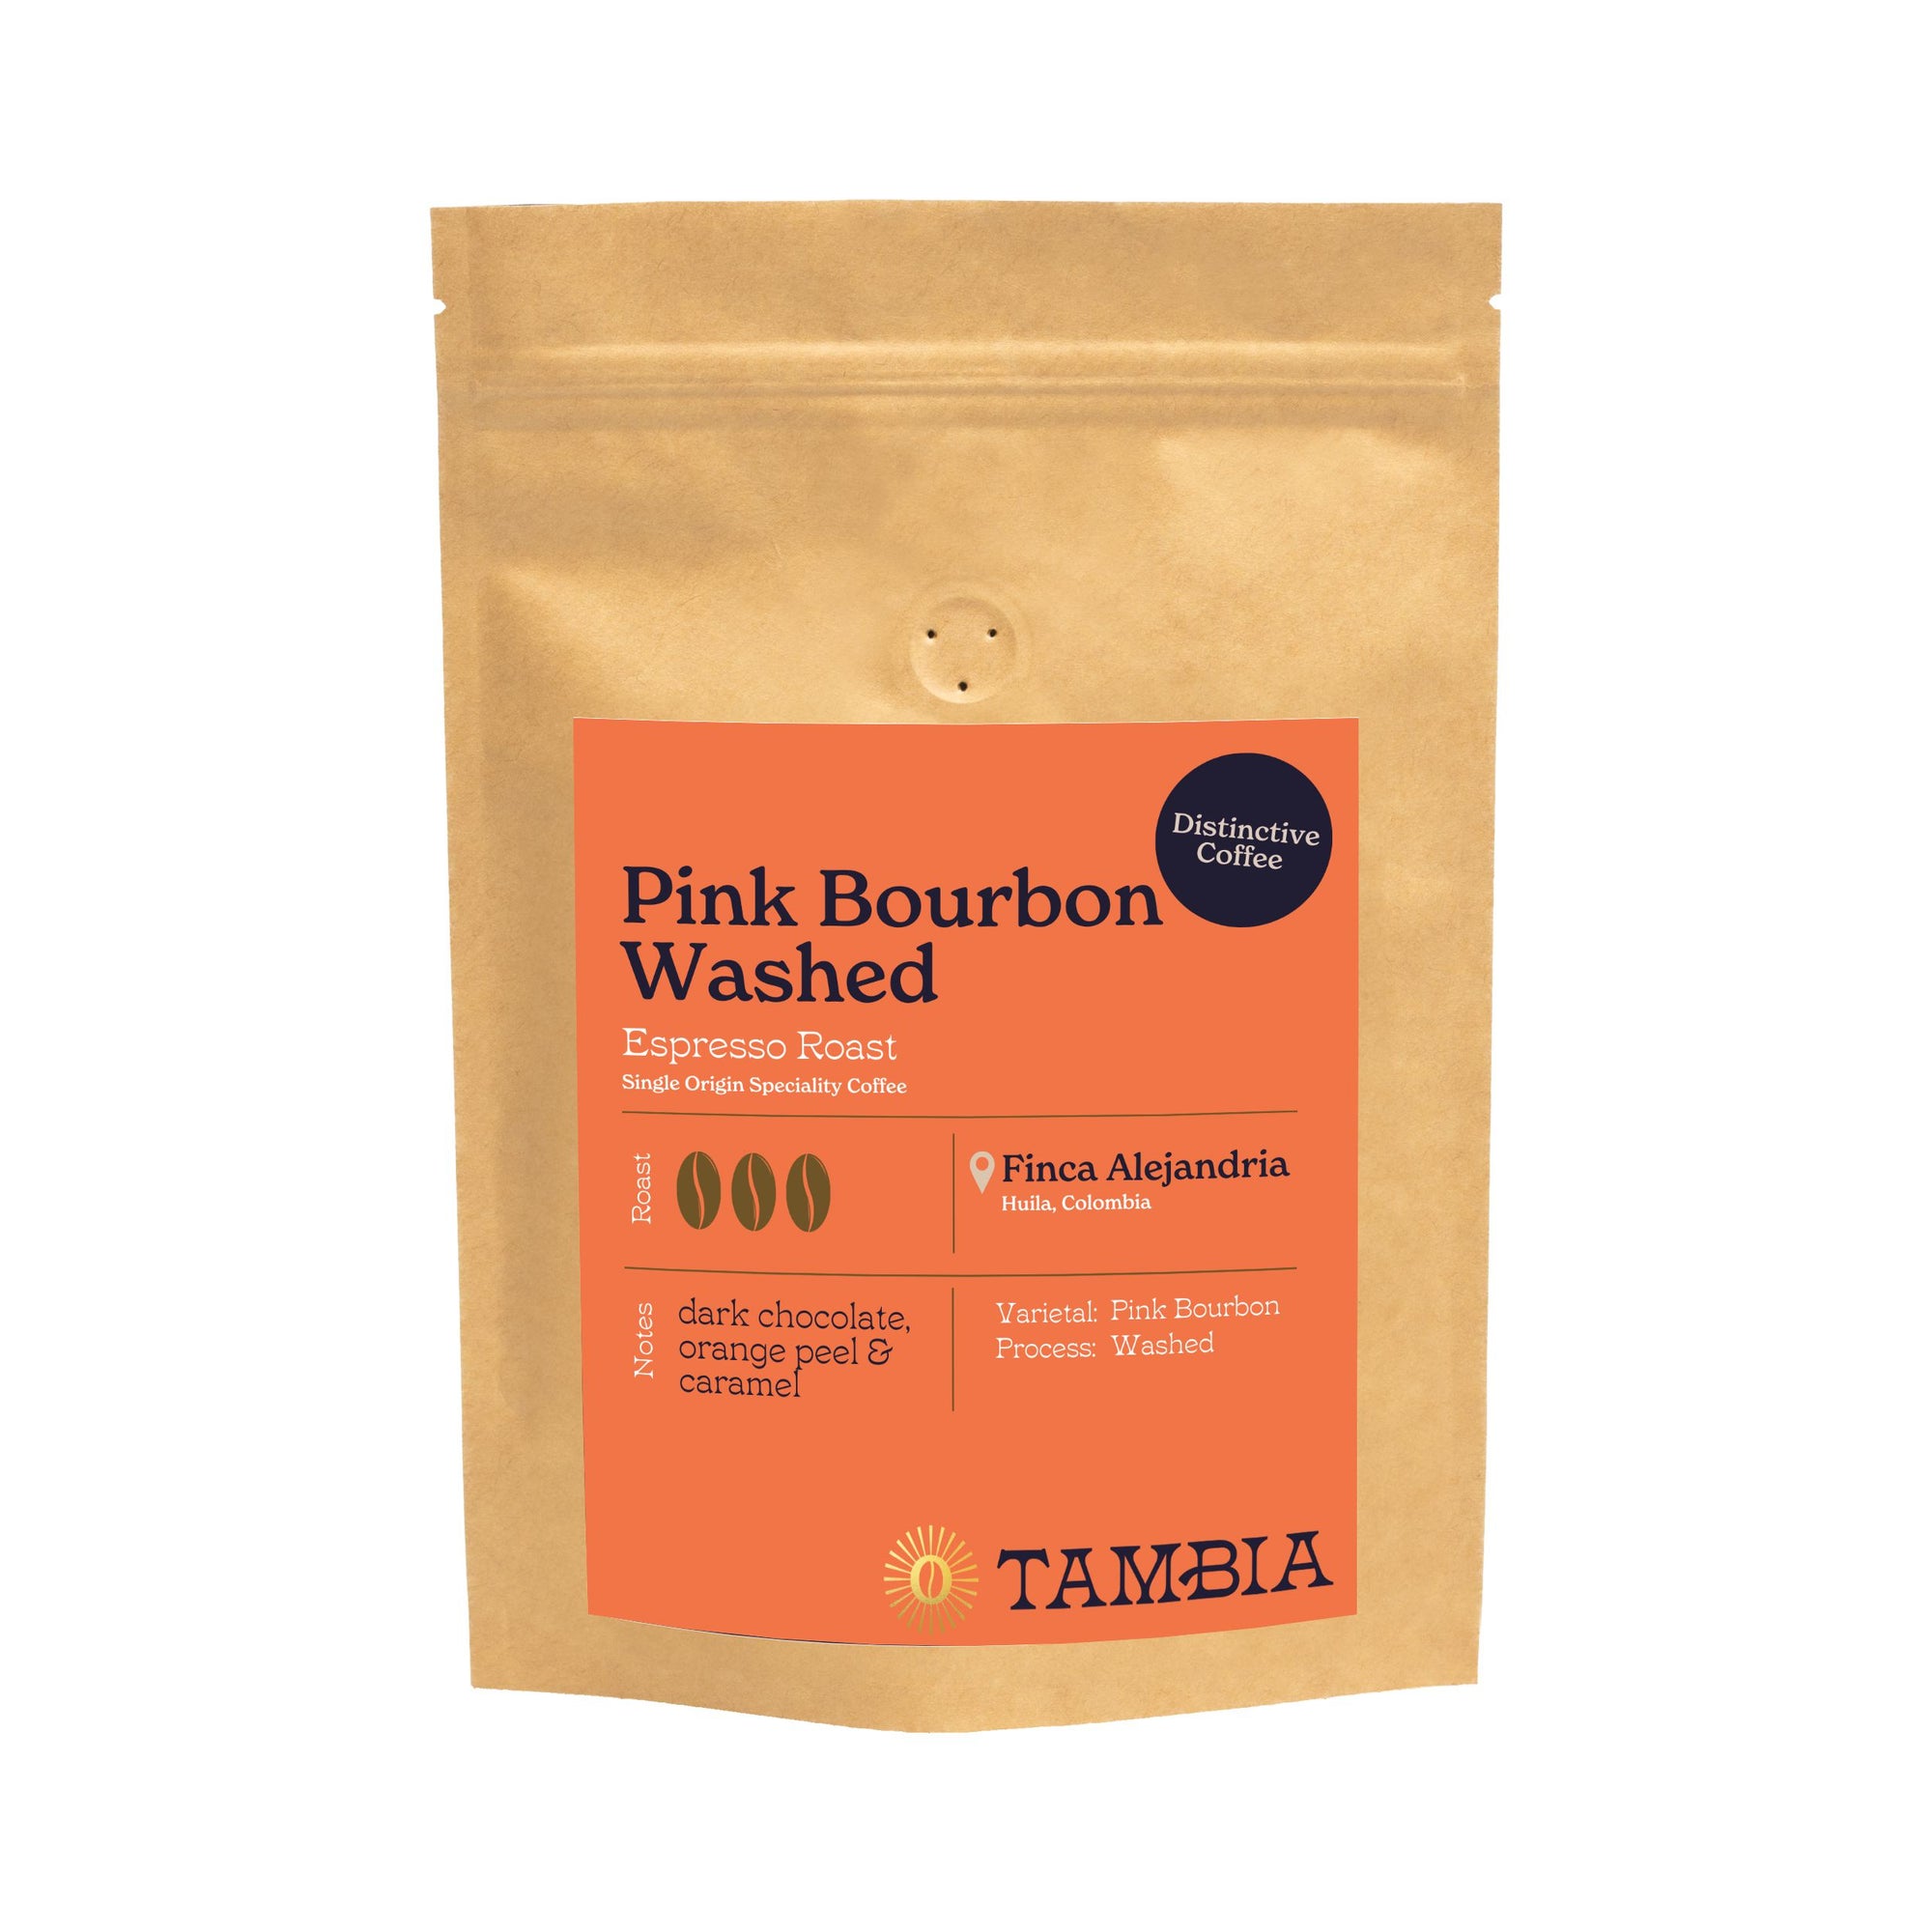 Tambia Pink Bourbon Washed